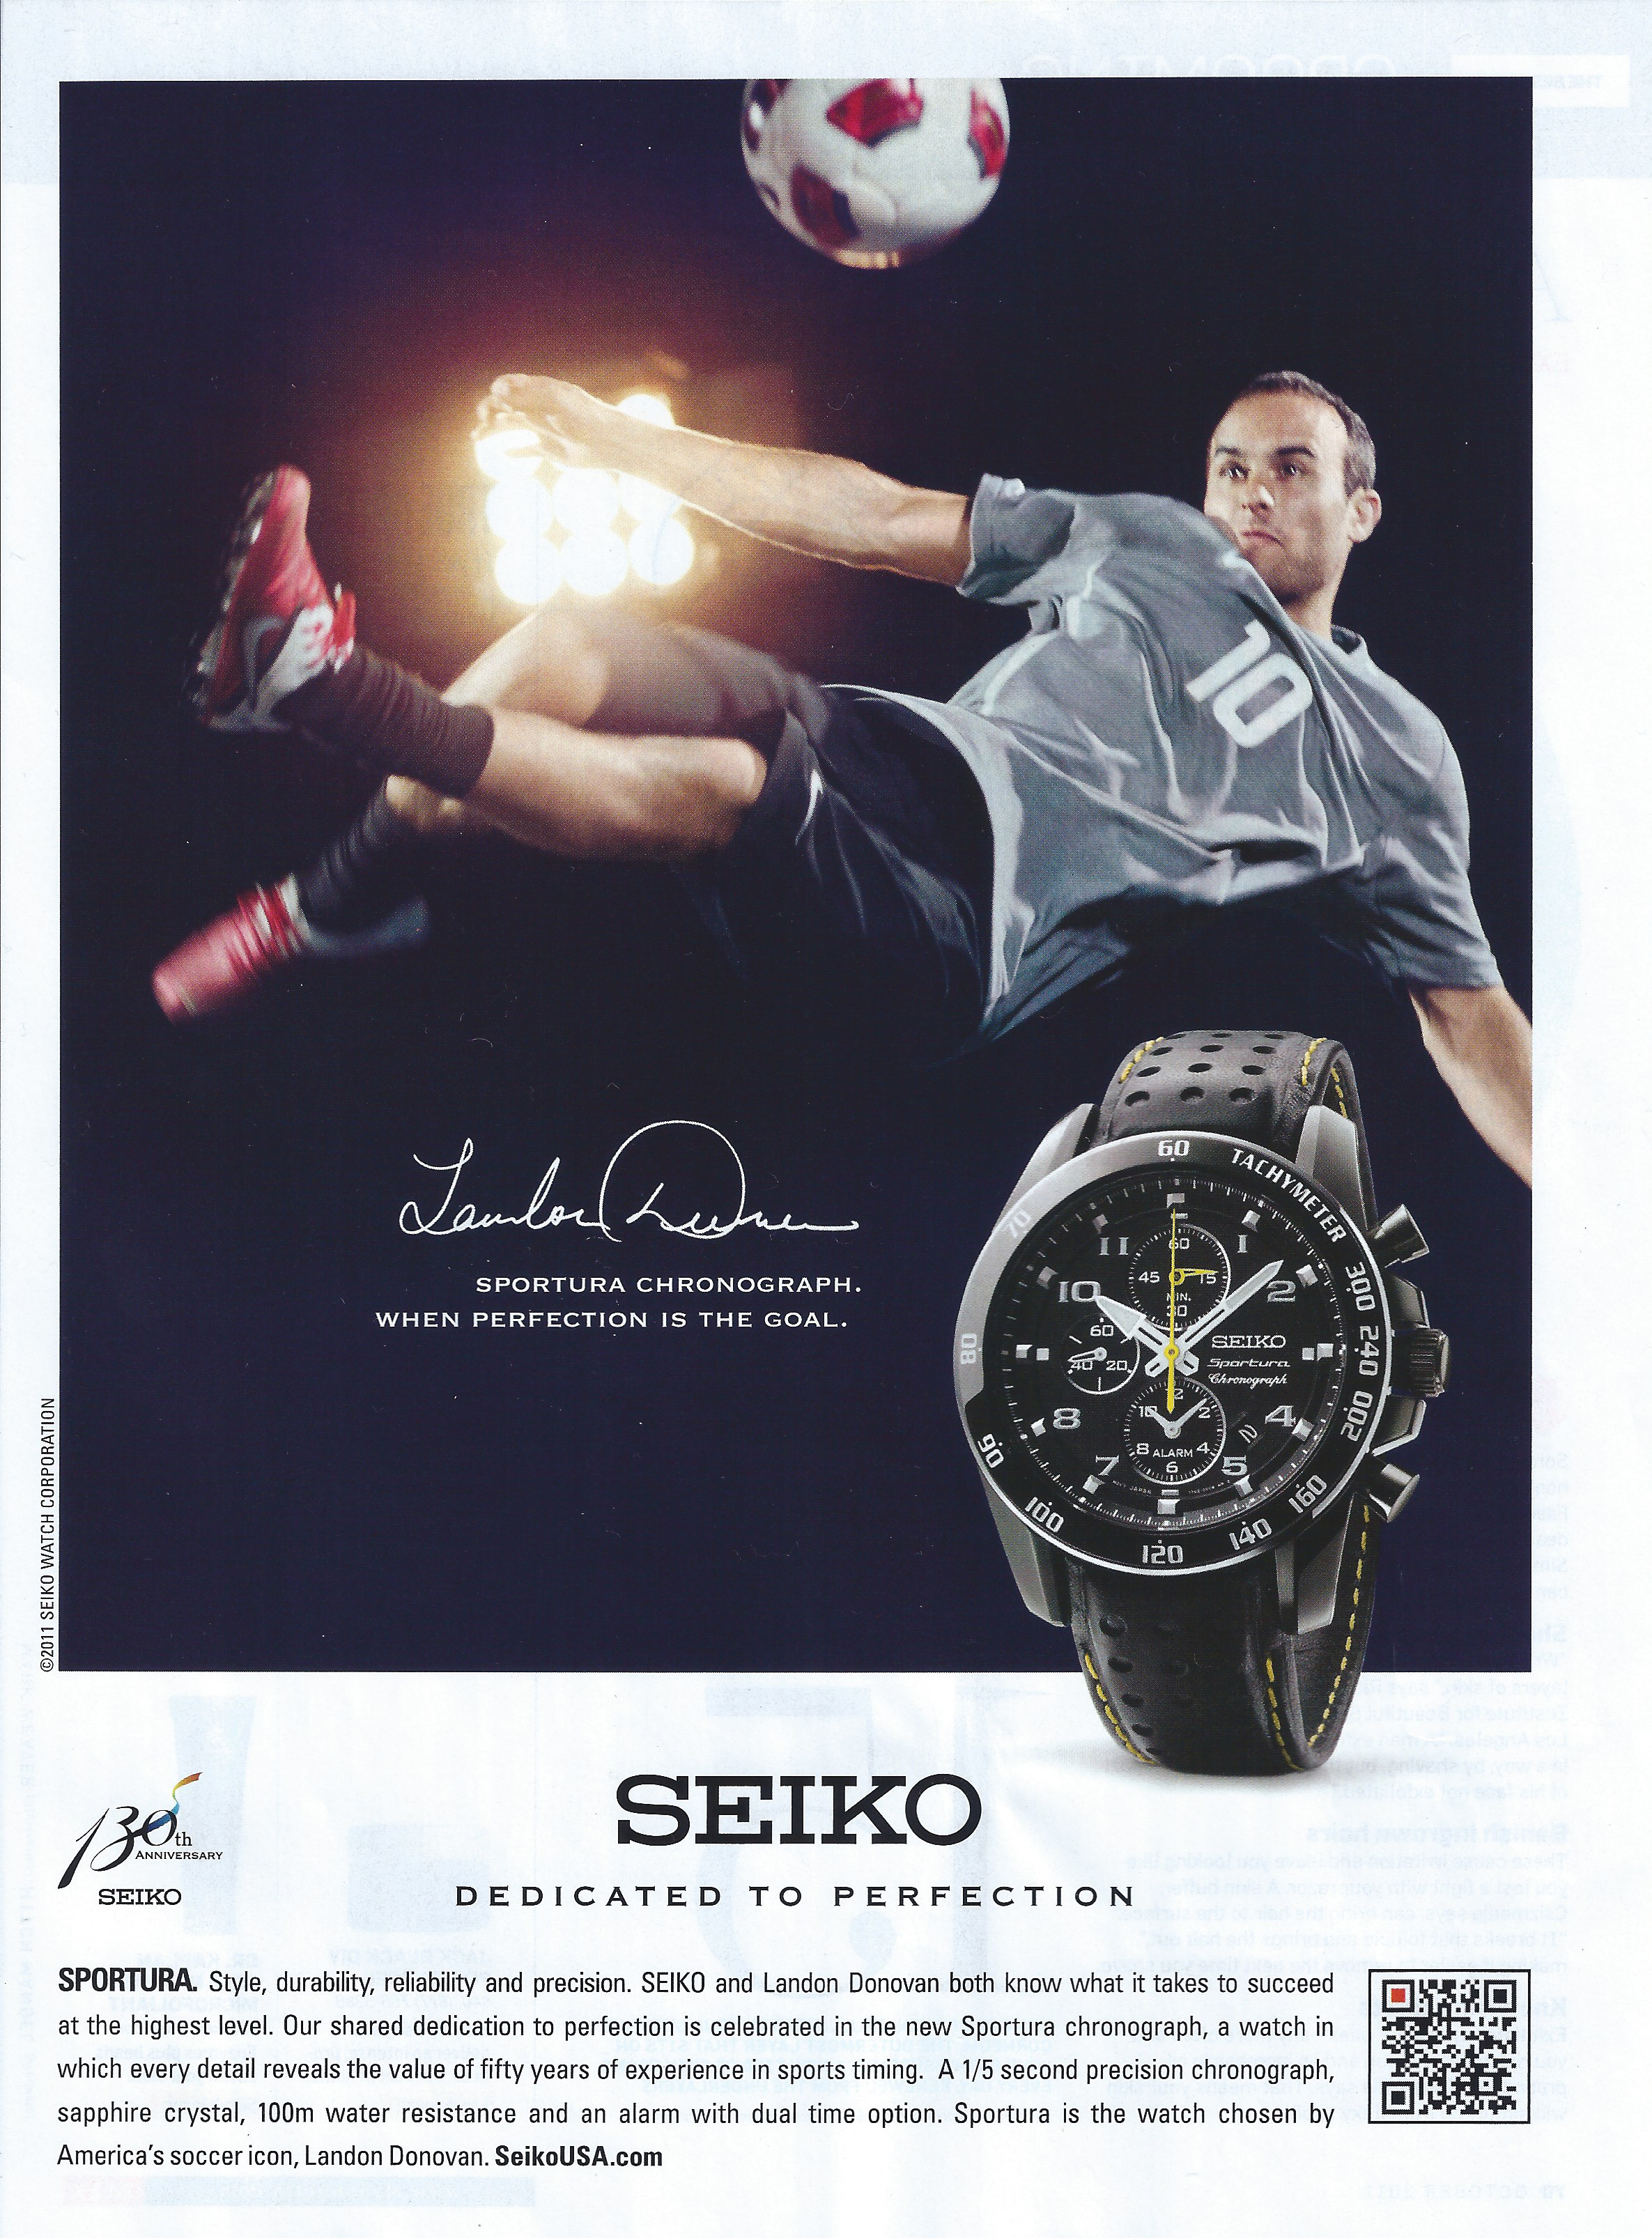 Sports Endorsements for Watches | theadvertisingeye